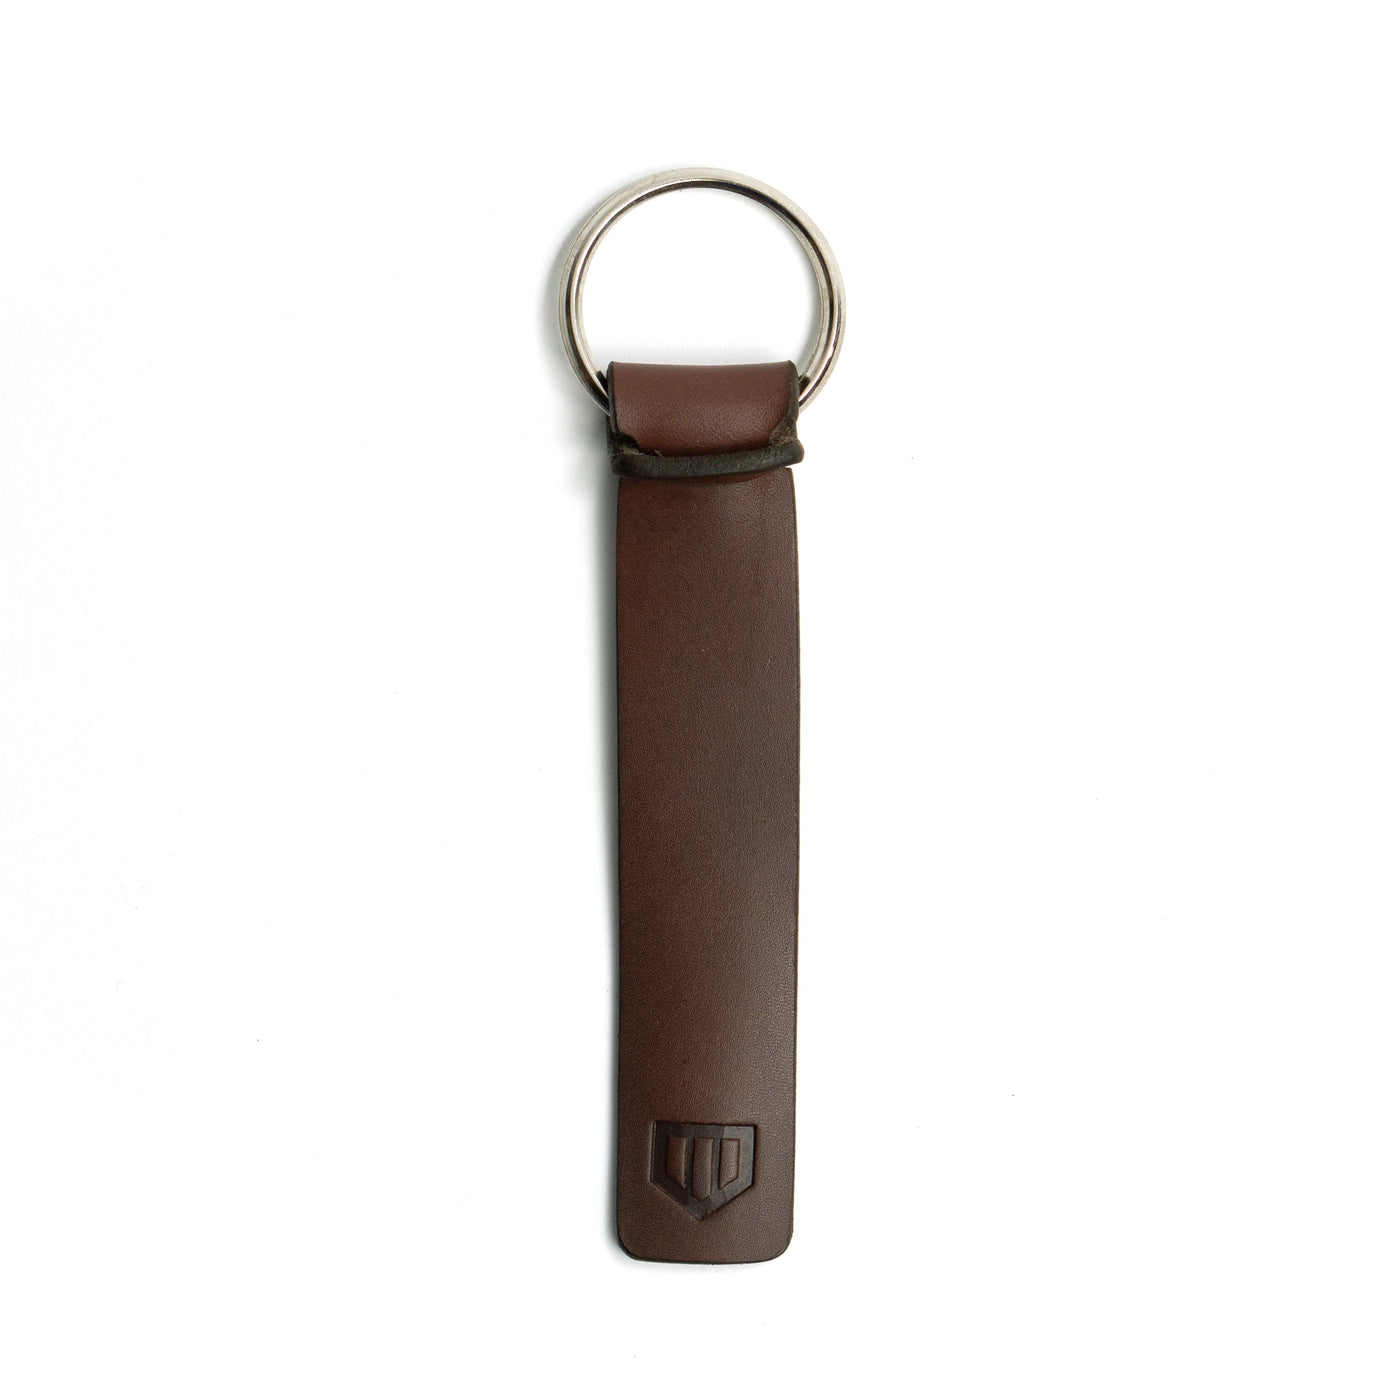 Key Chain - Leather Carabiner, Distressed Brown - Salty Dog T-Shirt Factory